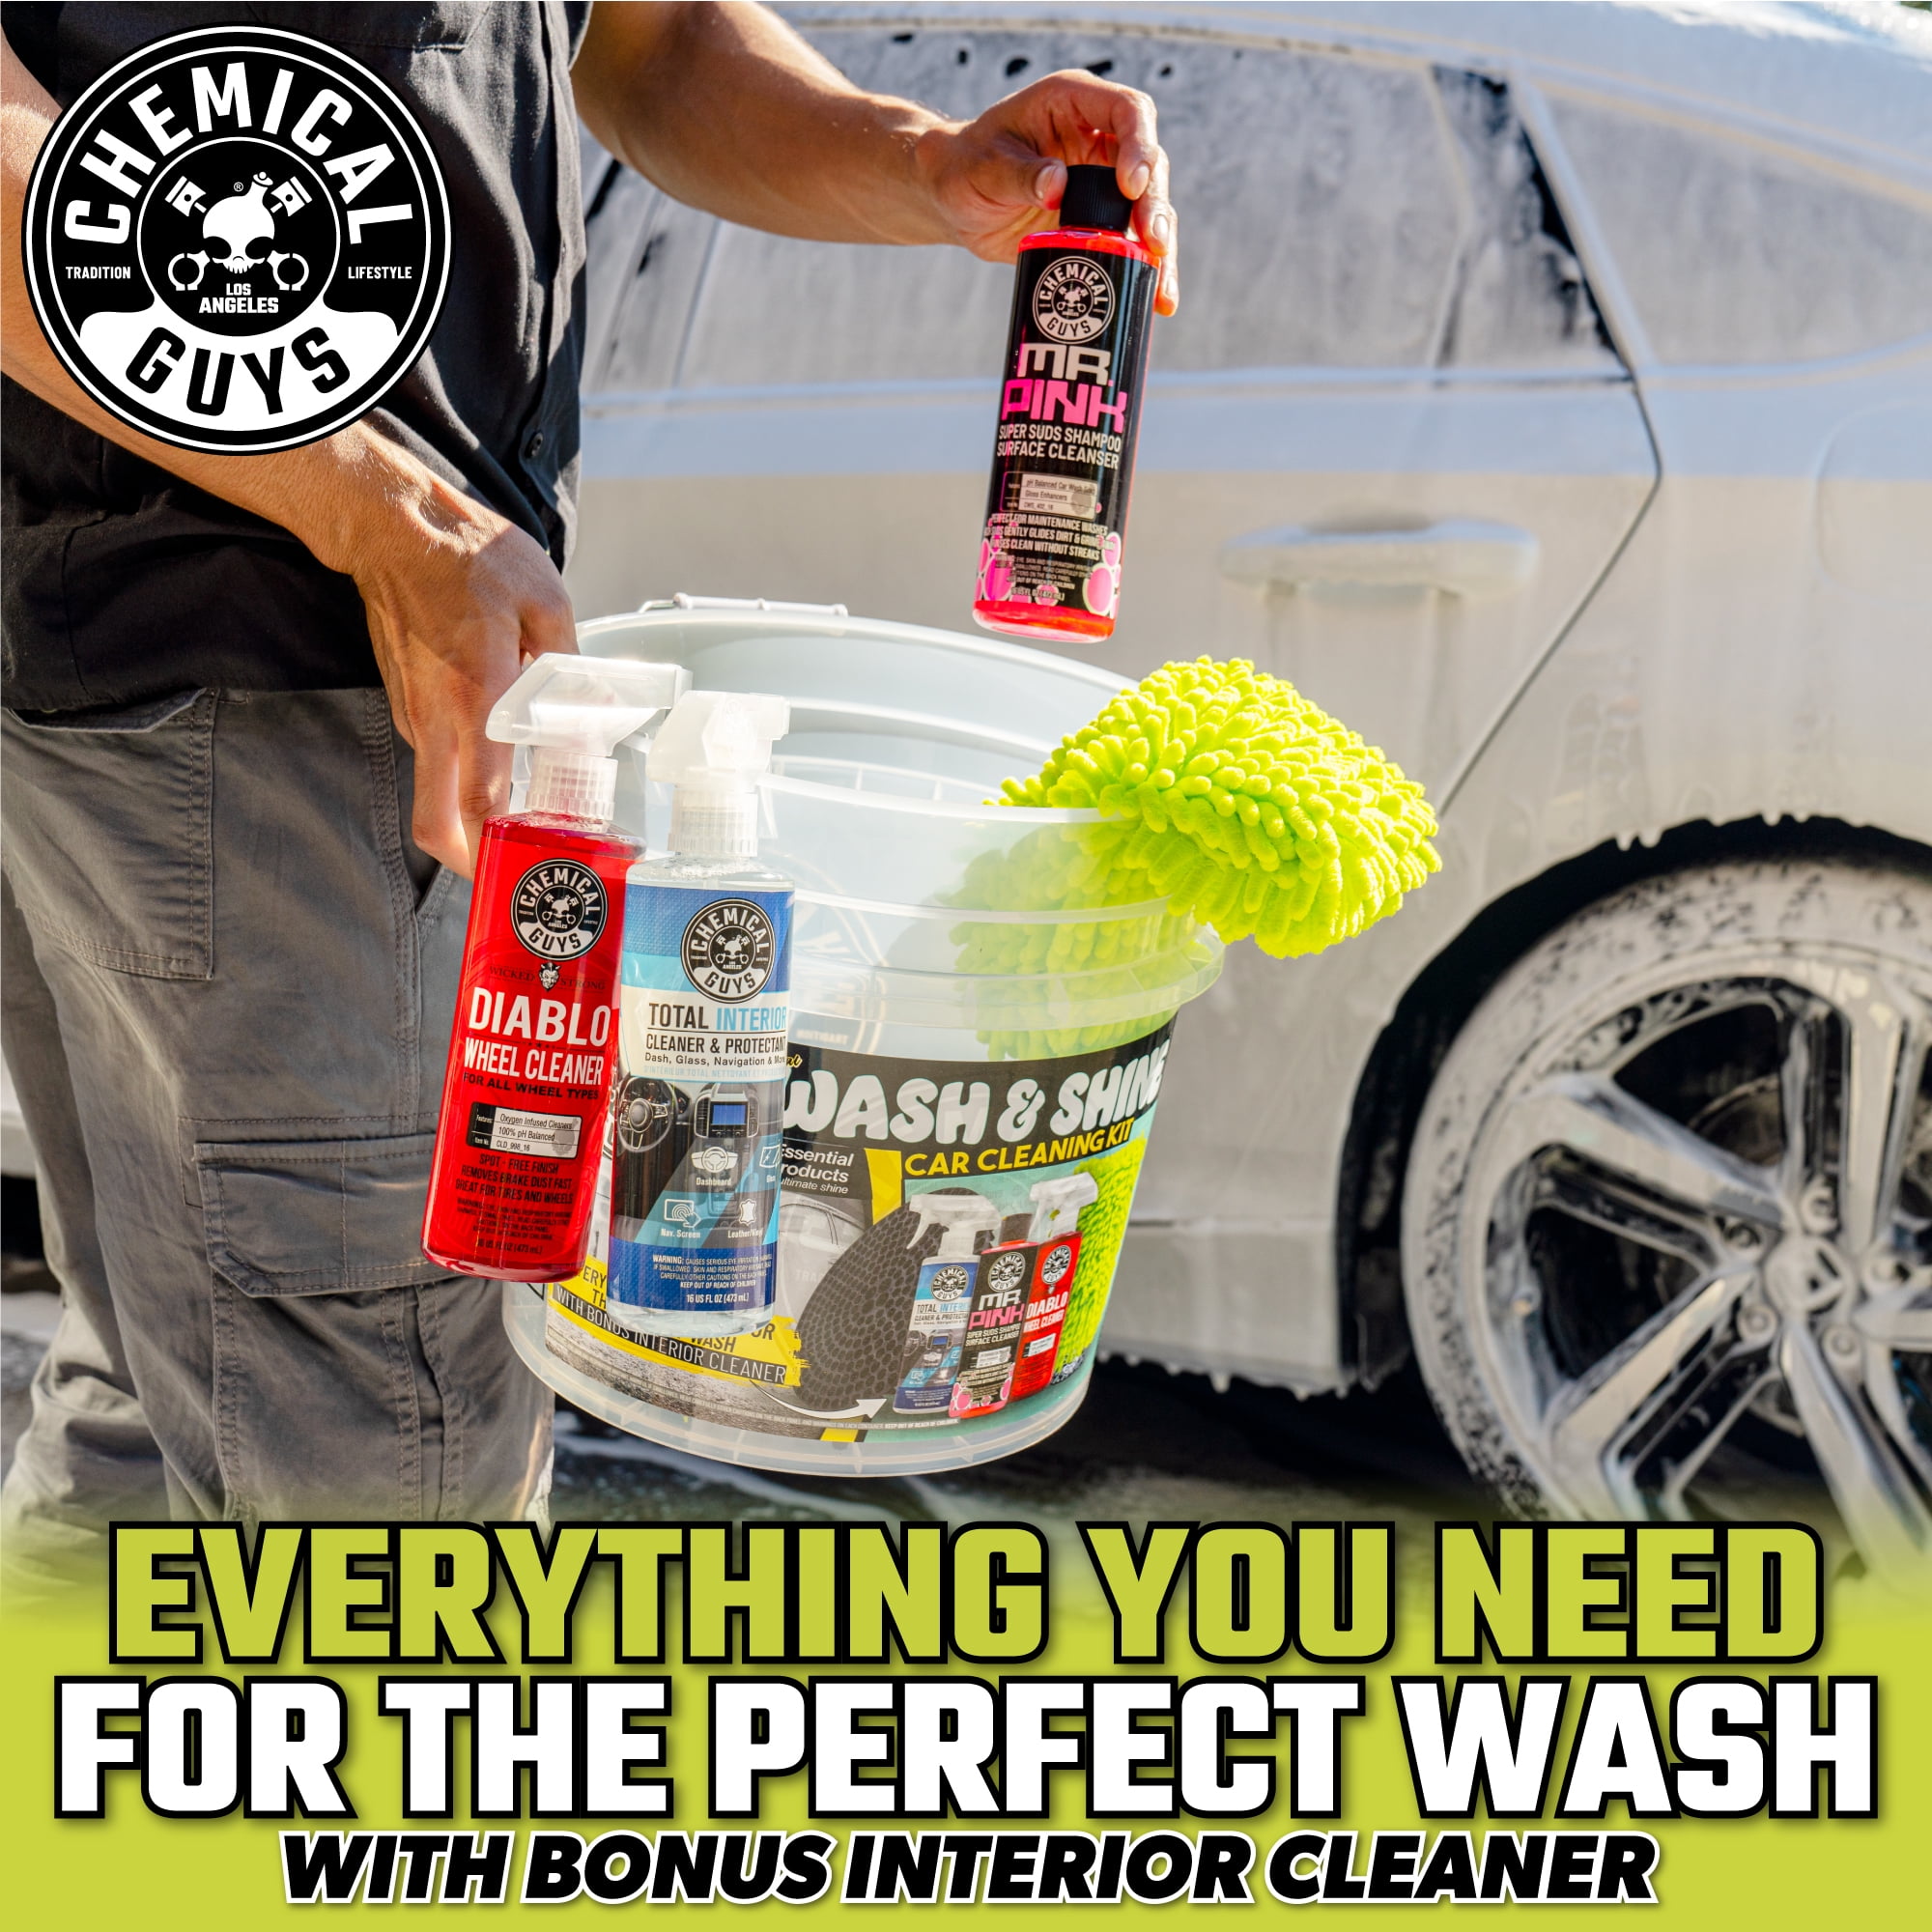 Chemical Guys Professional Wash  Shine Car Cleaning Kit (7 Essential  Products)